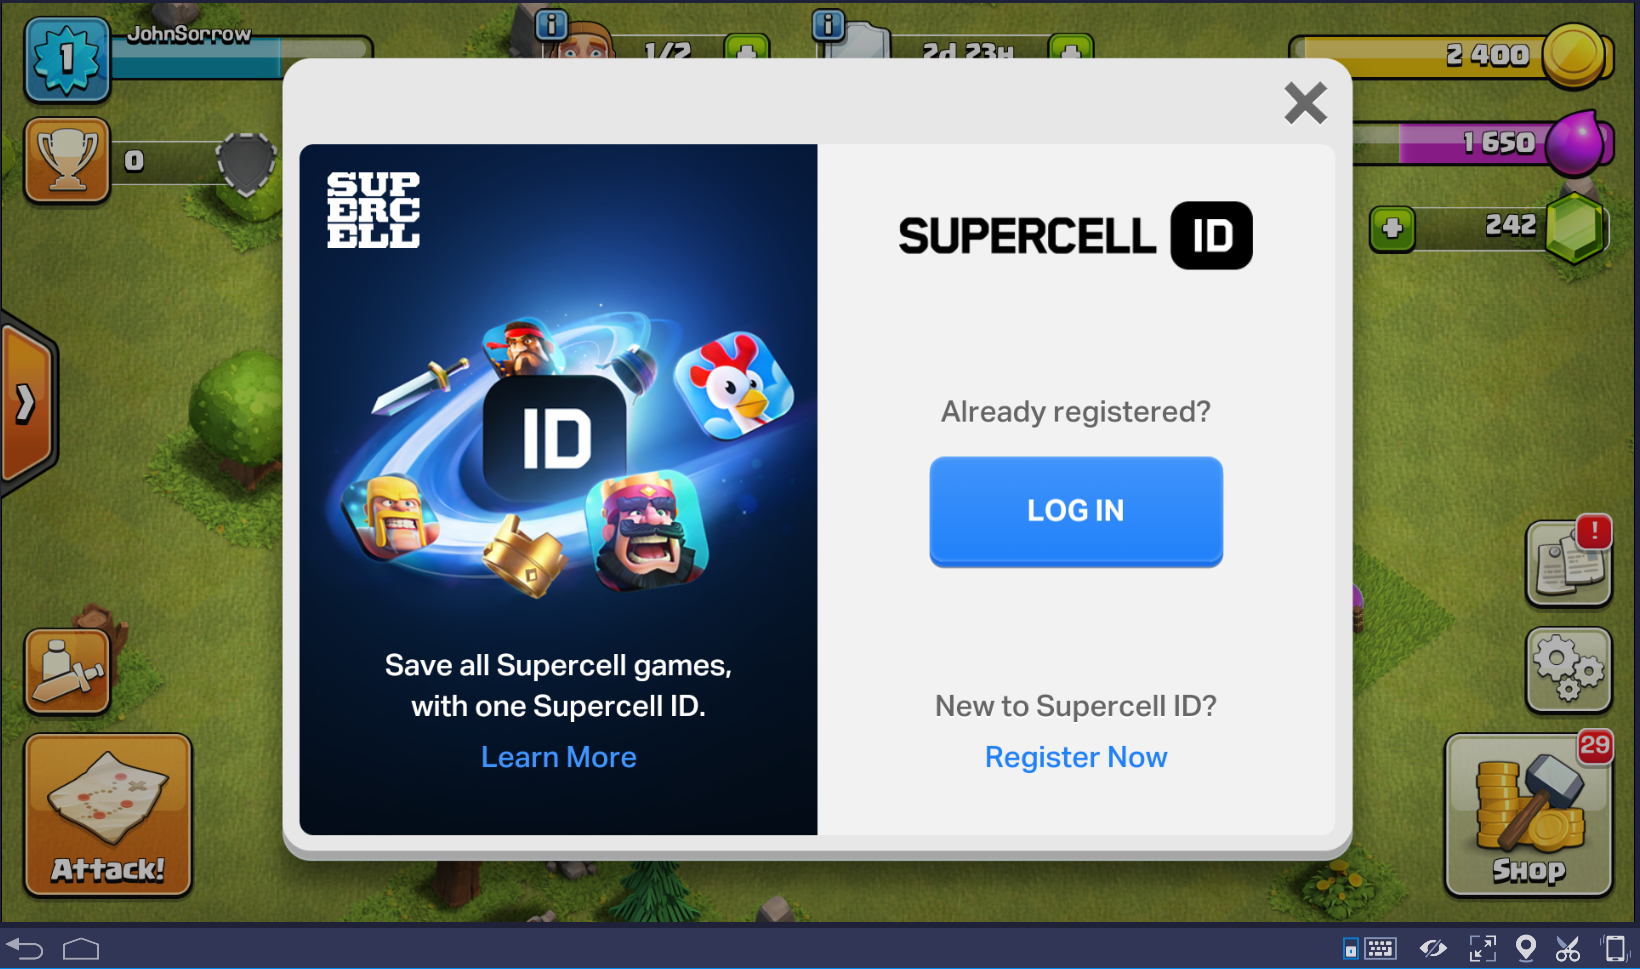 Log In Supercell ID